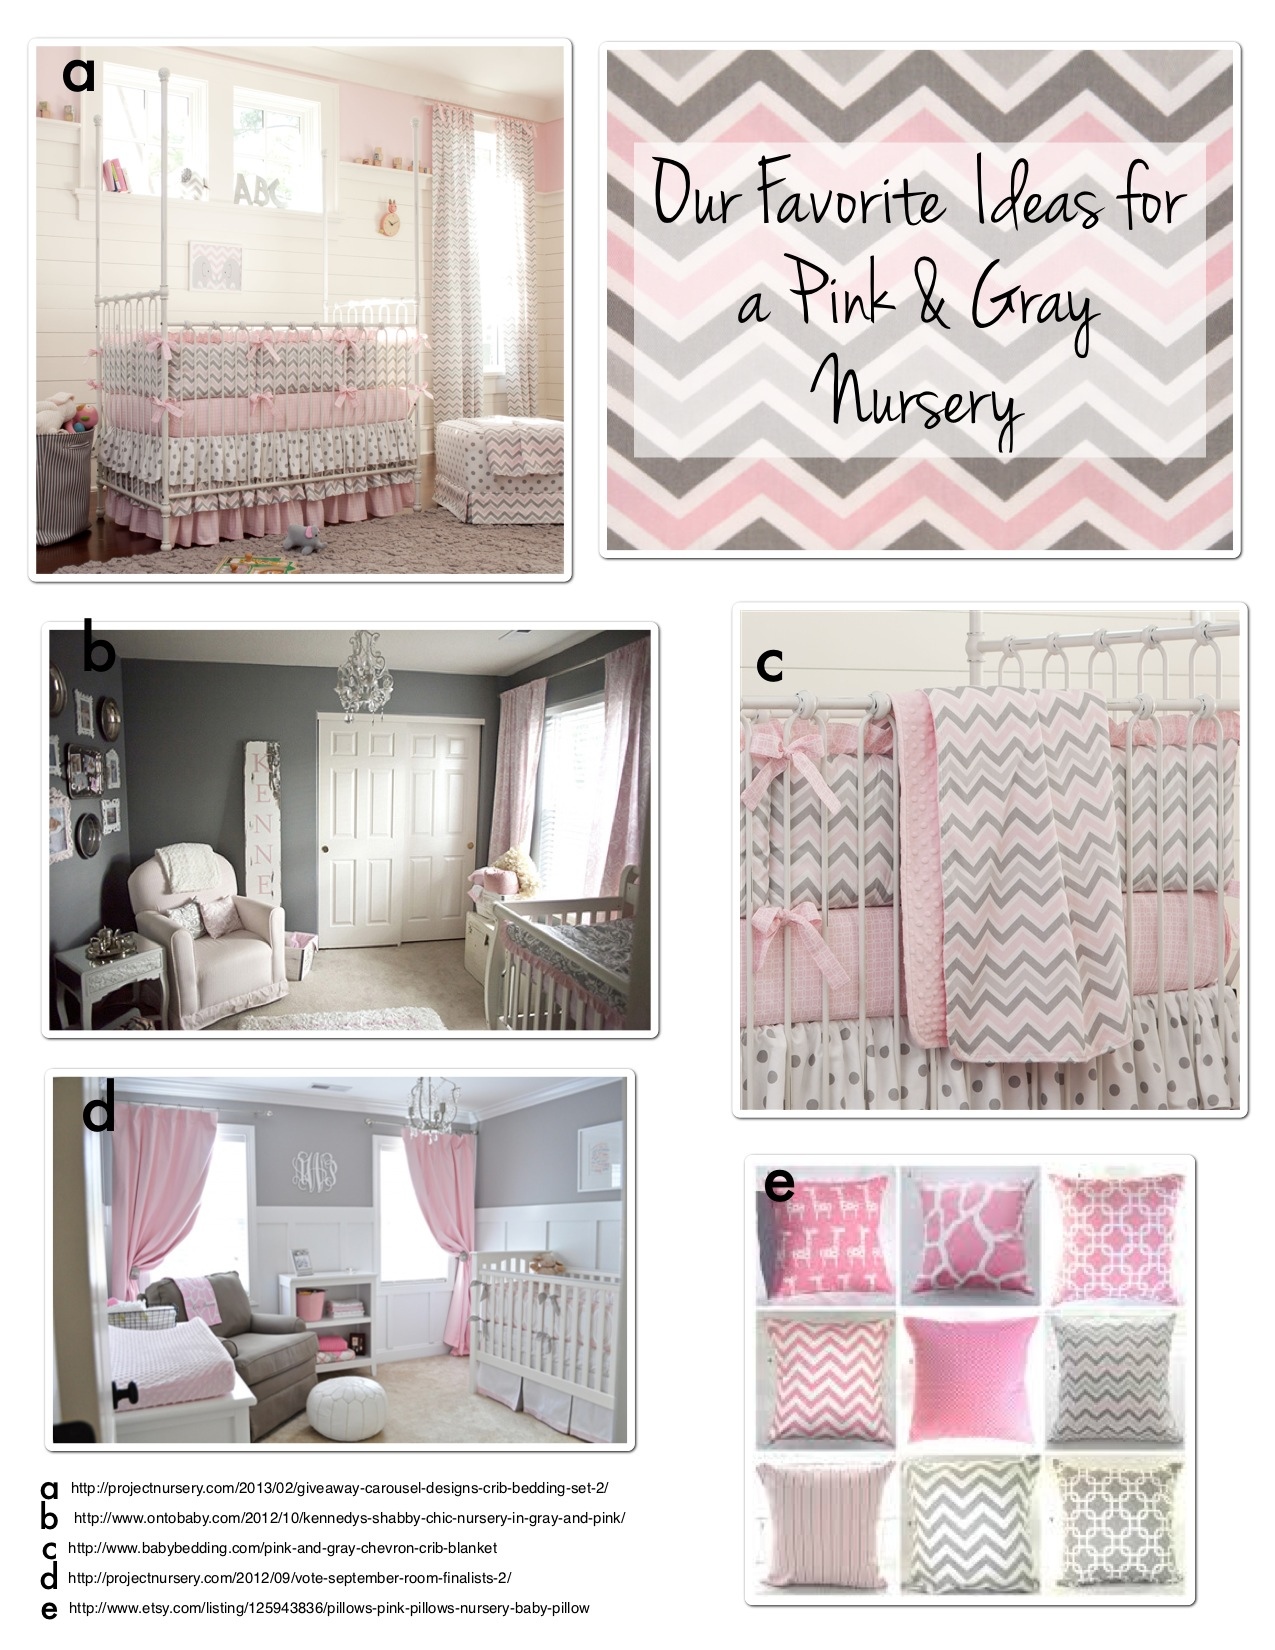 Pink and Gray Nursery Design Ideas and Inspiration www.frostedevents.com